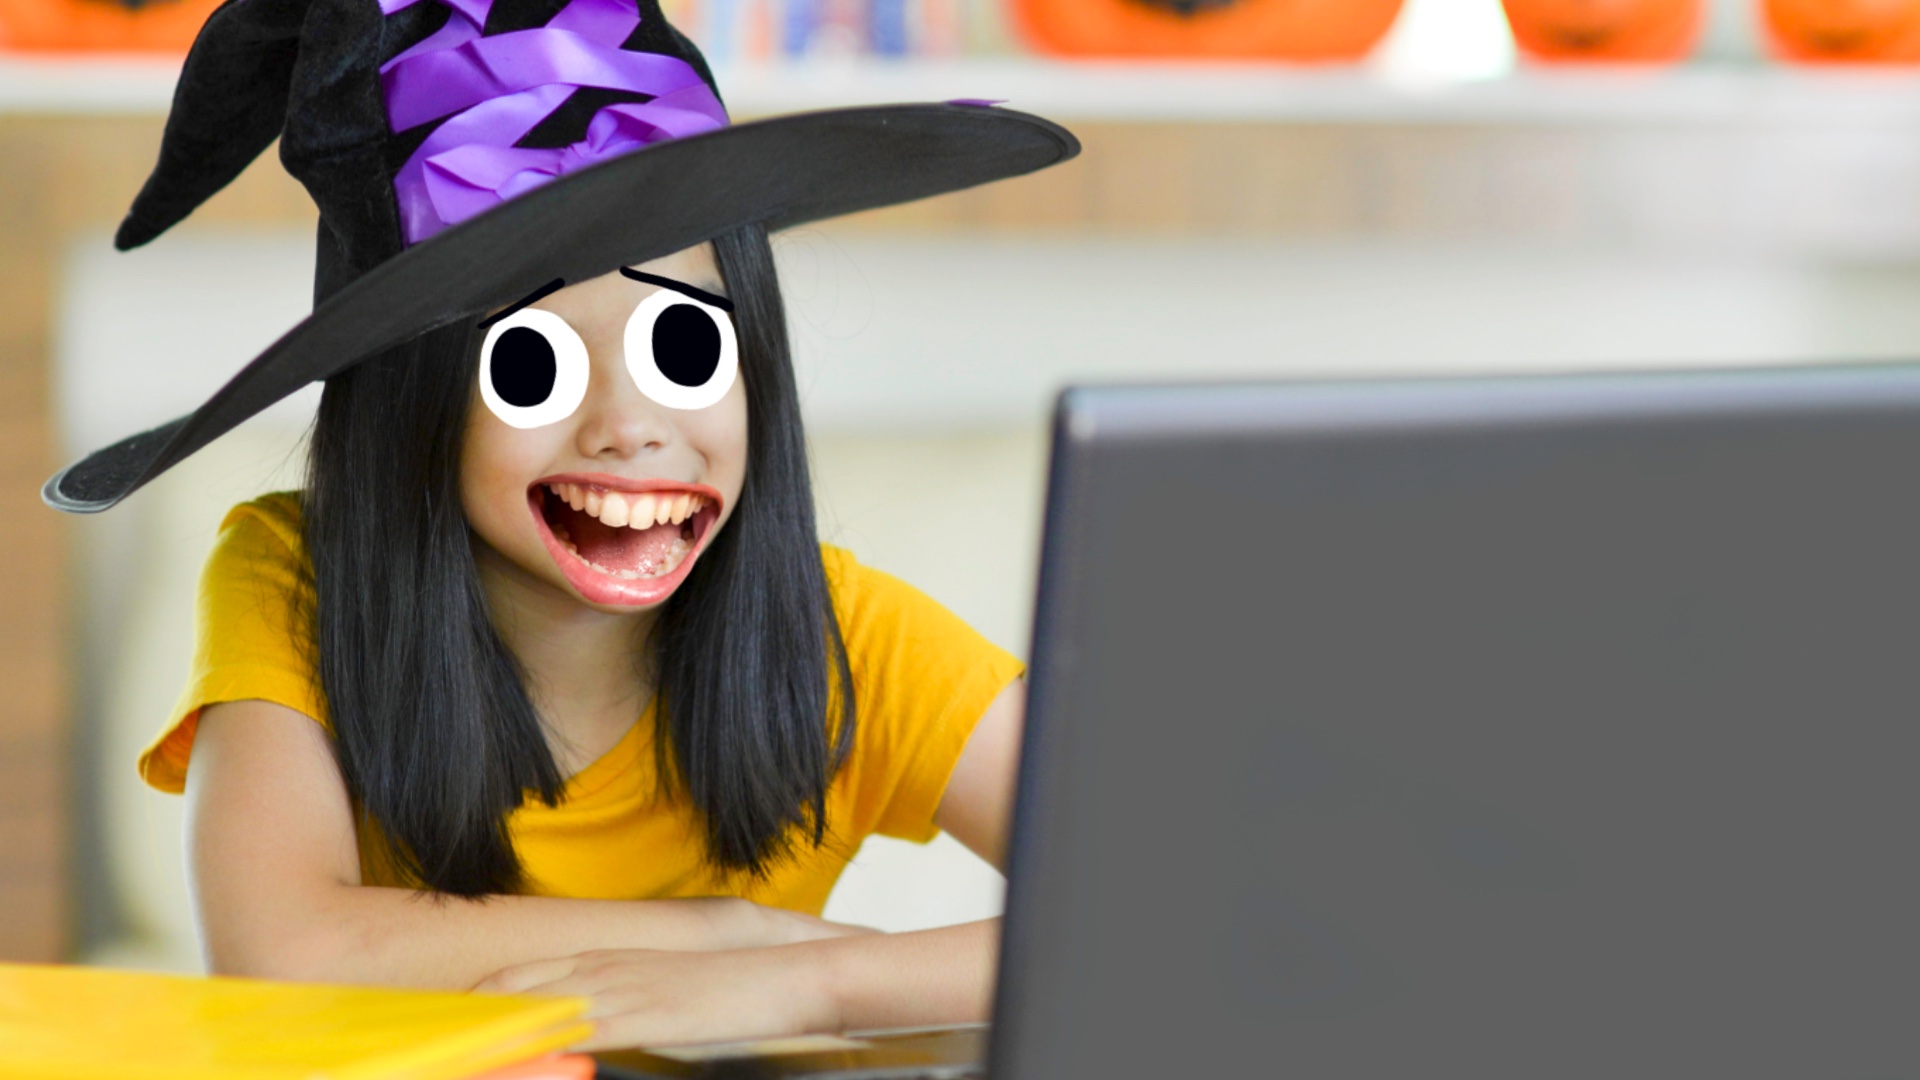 A student dressed as a witch, working on a laptop